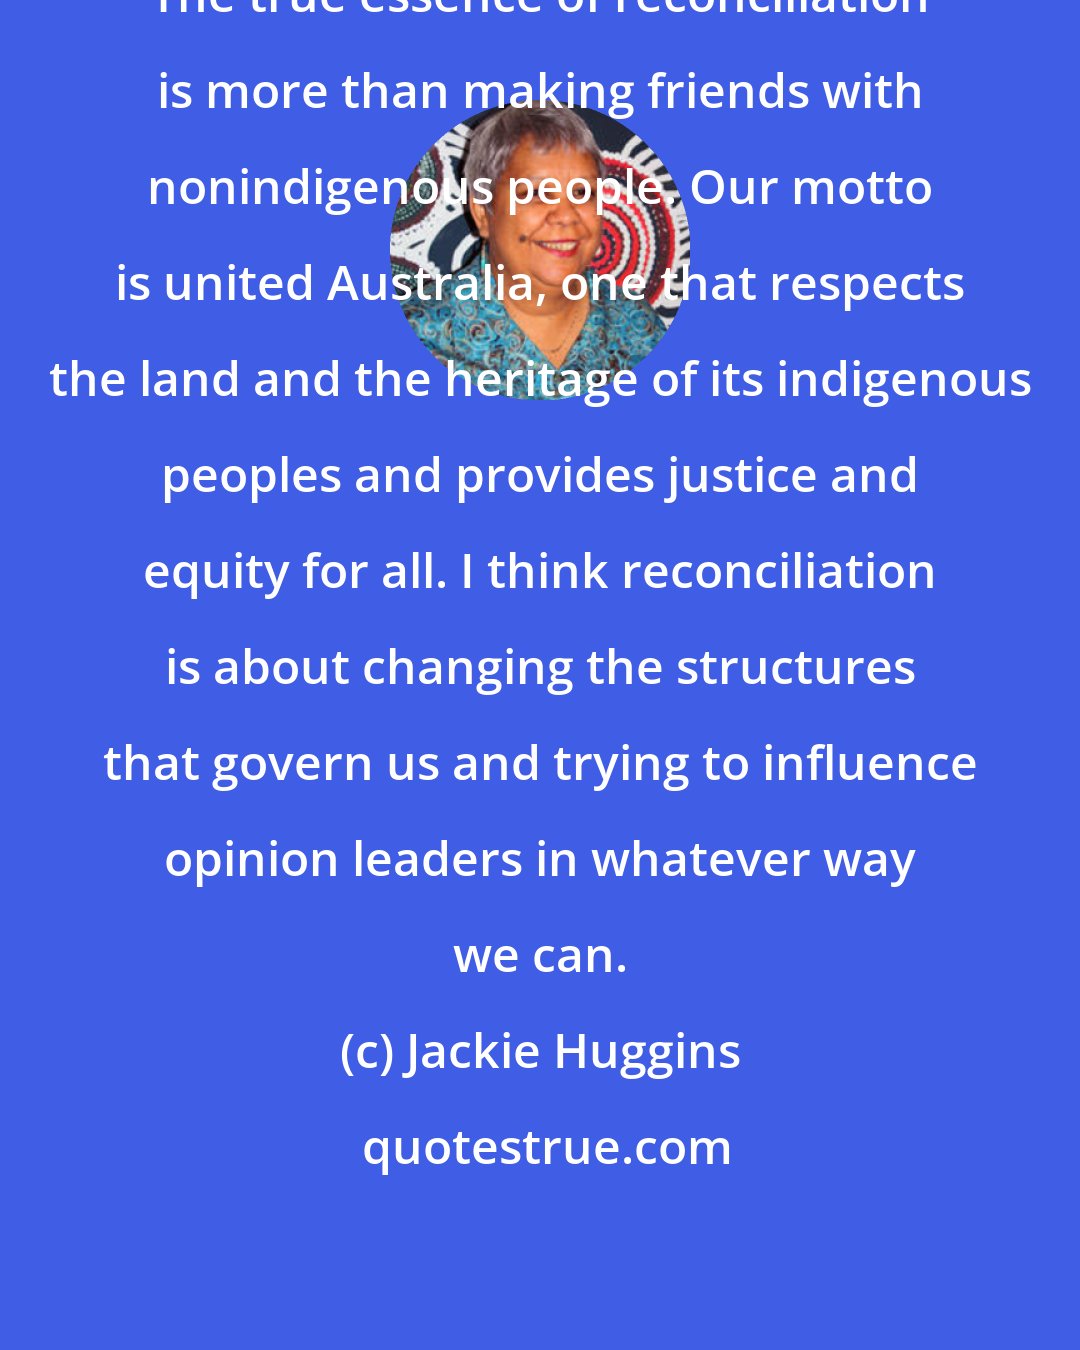 Jackie Huggins: The true essence of reconciliation is more than making friends with nonindigenous people. Our motto is united Australia, one that respects the land and the heritage of its indigenous peoples and provides justice and equity for all. I think reconciliation is about changing the structures that govern us and trying to influence opinion leaders in whatever way we can.